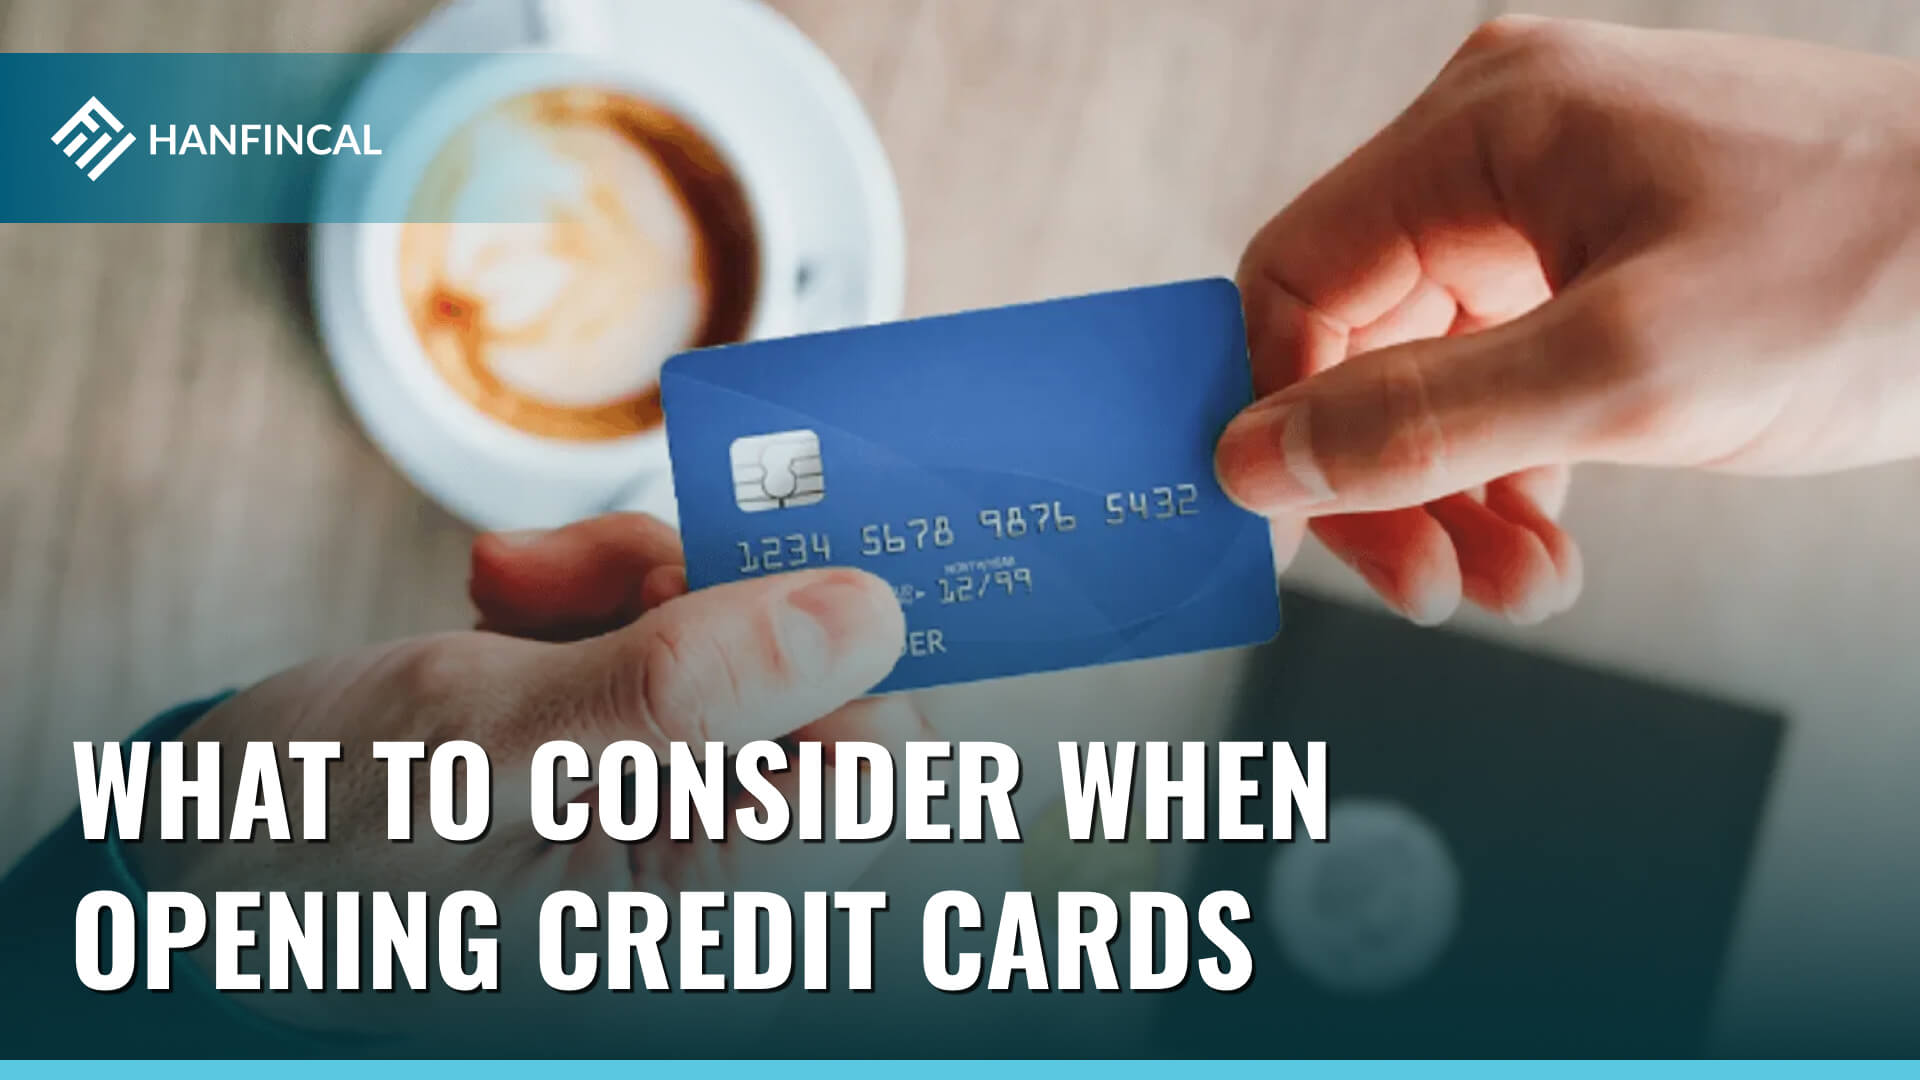 What to consider when opening credit cards?